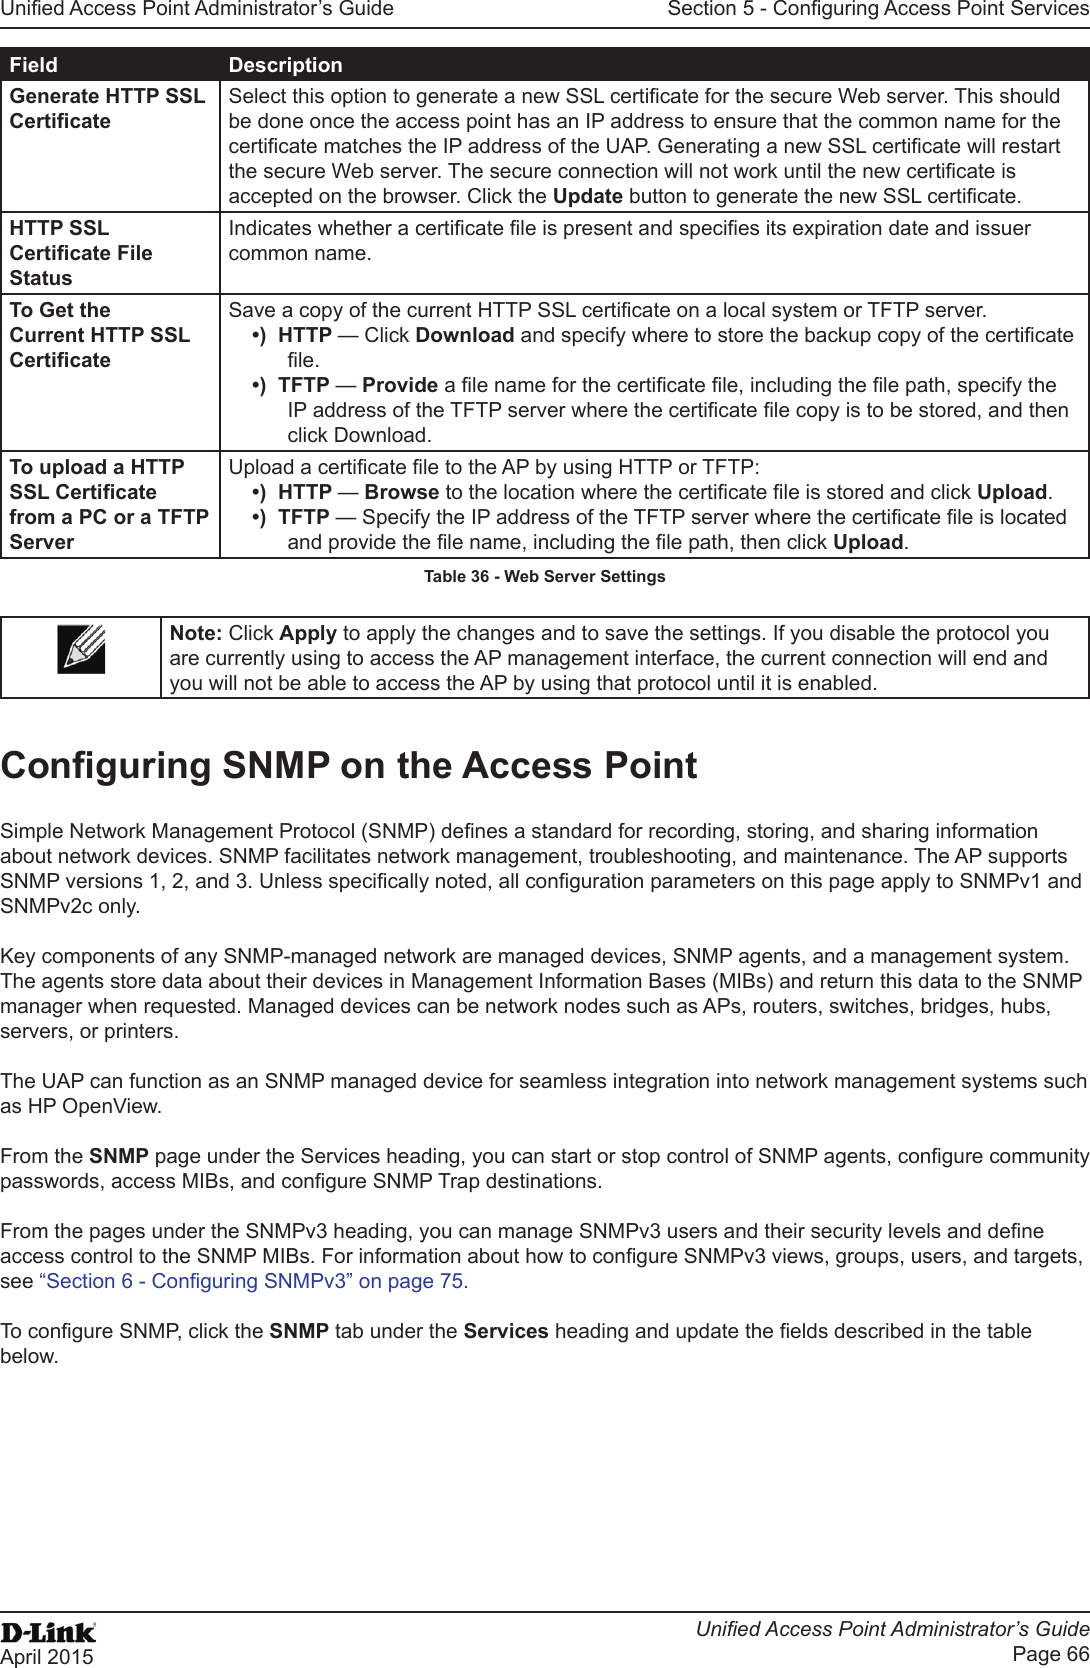 Unied Access Point Administrator’s GuideUnied Access Point Administrator’s GuidePage 66April 2015Section 5 - Conguring Access Point ServicesField DescriptionGenerate HTTP SSL CerticateSelect this option to generate a new SSL certicate for the secure Web server. This should be done once the access point has an IP address to ensure that the common name for the certicate matches the IP address of the UAP. Generating a new SSL certicate will restart the secure Web server. The secure connection will not work until the new certicate is accepted on the browser. Click the Update button to generate the new SSL certicate.HTTP SSL Certicate File StatusIndicates whether a certicate le is present and species its expiration date and issuer common name.To Get the Current HTTP SSL CerticateSave a copy of the current HTTP SSL certicate on a local system or TFTP server. •)  HTTP — Click Download and specify where to store the backup copy of the certicate le.•)  TFTP — Provide a le name for the certicate le, including the le path, specify the IP address of the TFTP server where the certicate le copy is to be stored, and then click Download.To upload a HTTP SSL Certicate from a PC or a TFTP ServerUpload a certicate le to the AP by using HTTP or TFTP:•)  HTTP — Browse to the location where the certicate le is stored and click Upload. •)  TFTP — Specify the IP address of the TFTP server where the certicate le is located and provide the le name, including the le path, then click Upload.Table 36 - Web Server SettingsNote: Click Apply to apply the changes and to save the settings. If you disable the protocol you are currently using to access the AP management interface, the current connection will end and you will not be able to access the AP by using that protocol until it is enabled.Conguring SNMP on the Access PointSimple Network Management Protocol (SNMP) denes a standard for recording, storing, and sharing information about network devices. SNMP facilitates network management, troubleshooting, and maintenance. The AP supports SNMP versions 1, 2, and 3. Unless specically noted, all conguration parameters on this page apply to SNMPv1 and SNMPv2c only.Key components of any SNMP-managed network are managed devices, SNMP agents, and a management system. The agents store data about their devices in Management Information Bases (MIBs) and return this data to the SNMP manager when requested. Managed devices can be network nodes such as APs, routers, switches, bridges, hubs, servers, or printers.The UAP can function as an SNMP managed device for seamless integration into network management systems such as HP OpenView. From the SNMP page under the Services heading, you can start or stop control of SNMP agents, congure community passwords, access MIBs, and congure SNMP Trap destinations. From the pages under the SNMPv3 heading, you can manage SNMPv3 users and their security levels and dene access control to the SNMP MIBs. For information about how to congure SNMPv3 views, groups, users, and targets, see “Section 6 - Conguring SNMPv3” on page 75. To congure SNMP, click the SNMP tab under the Services heading and update the elds described in the table below.